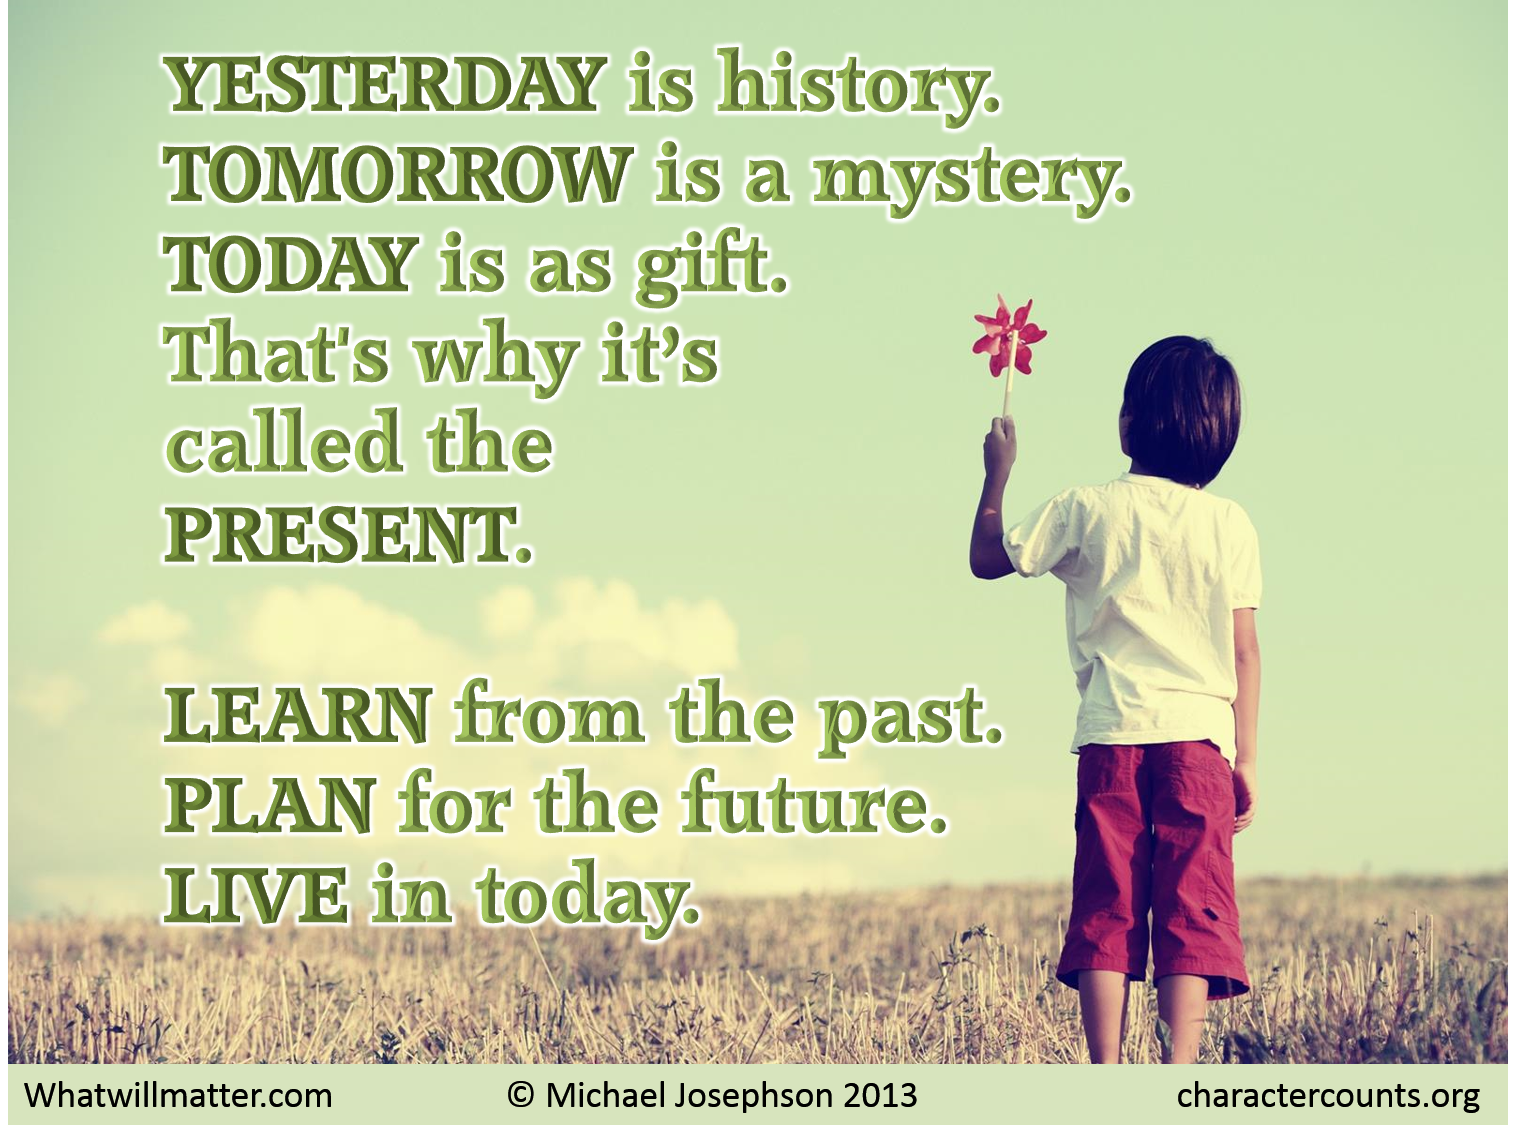 Never be the story. Quotes about History. Proverbs about past. Quotes about Future. Today is a Gift.